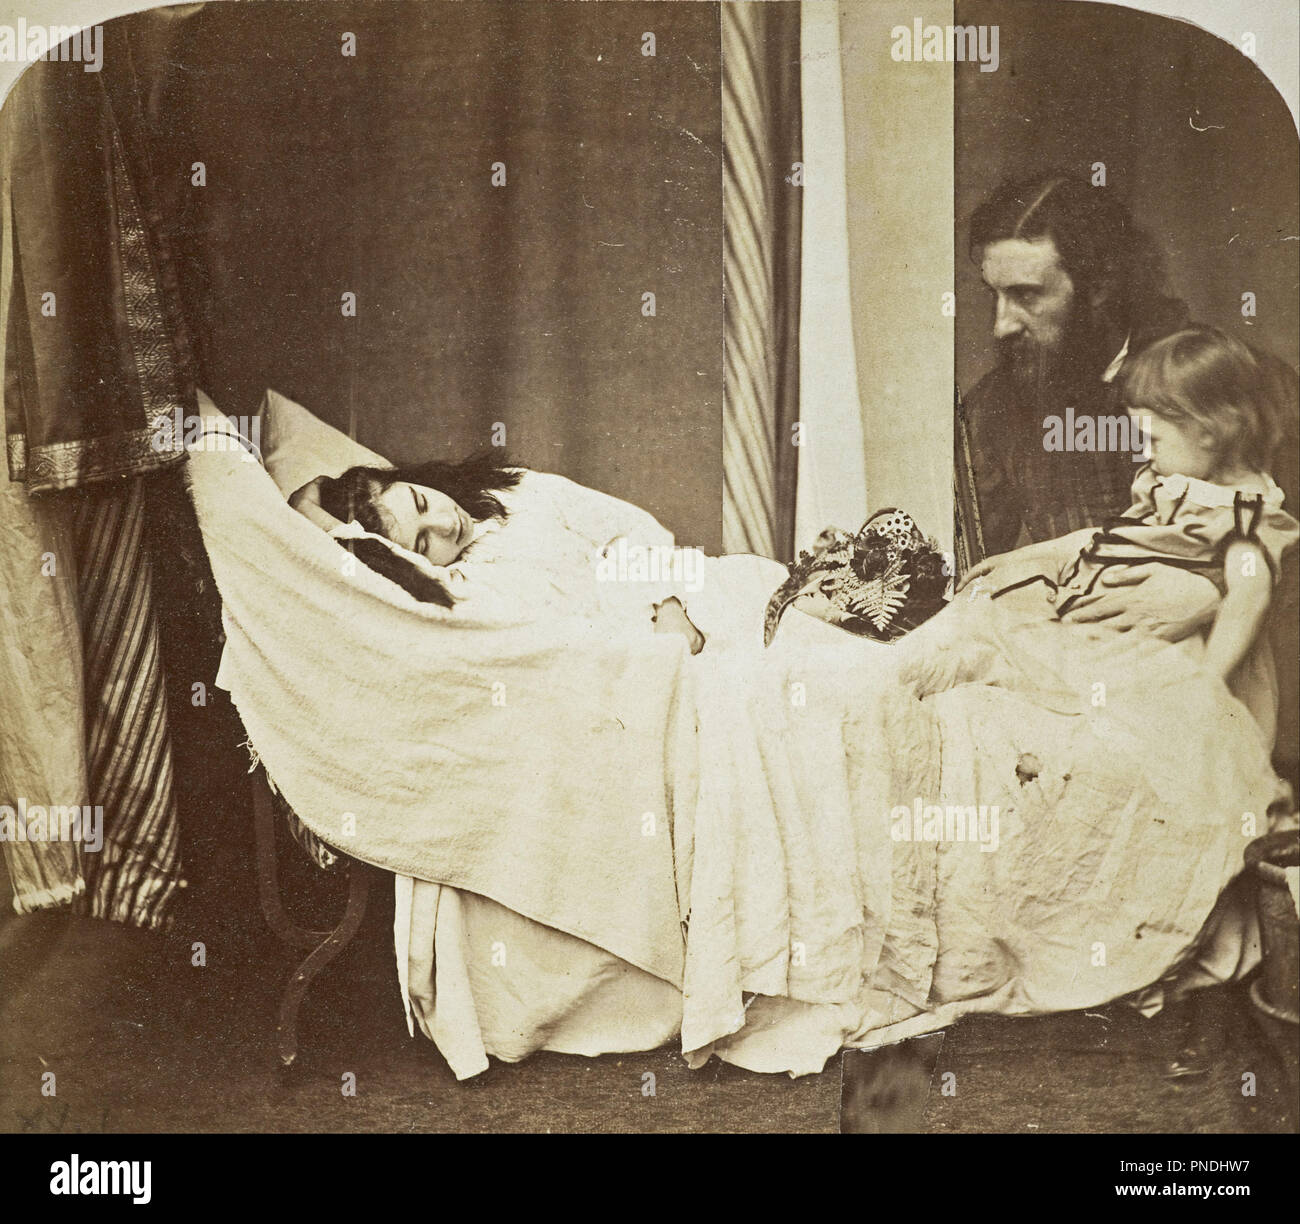 'Mary J. MacDonald dreaming of her father [George MacDonald] and brother Ronald'. Date/Period: 1864. Photograph. Albumen print, composite image. Height: 159 mm (6.25 in); Width: 182 mm (7.16 in). Author: Rev. Charles Lutwidge Dodgson, 'Lewis Carroll'. Stock Photo